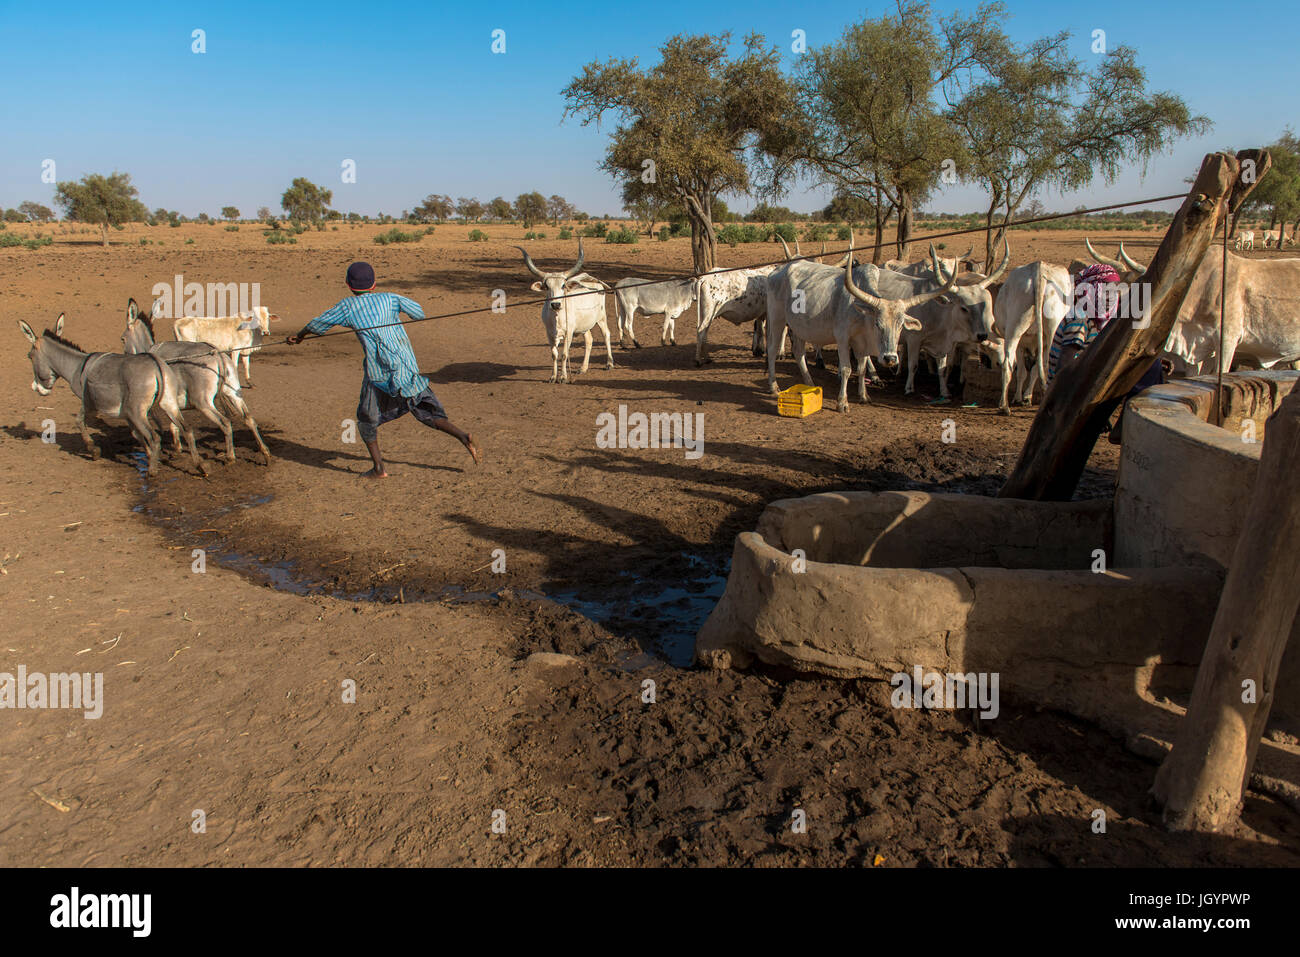 Cattle and well. Senegal. Stock Photo